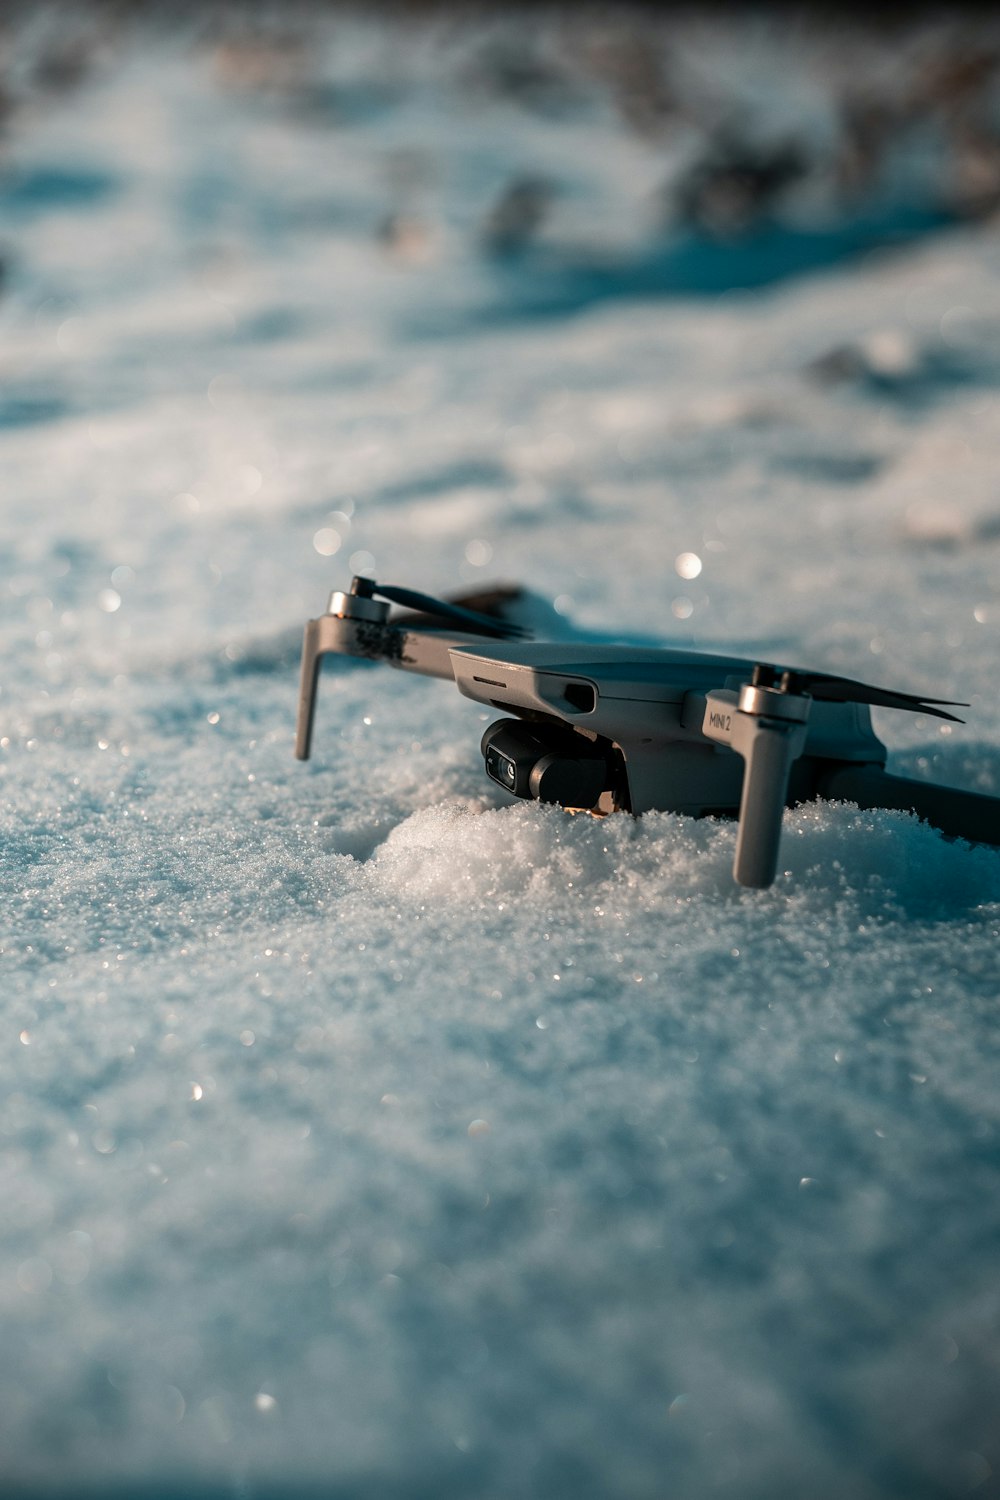 a close up of a toy airplane in the snow